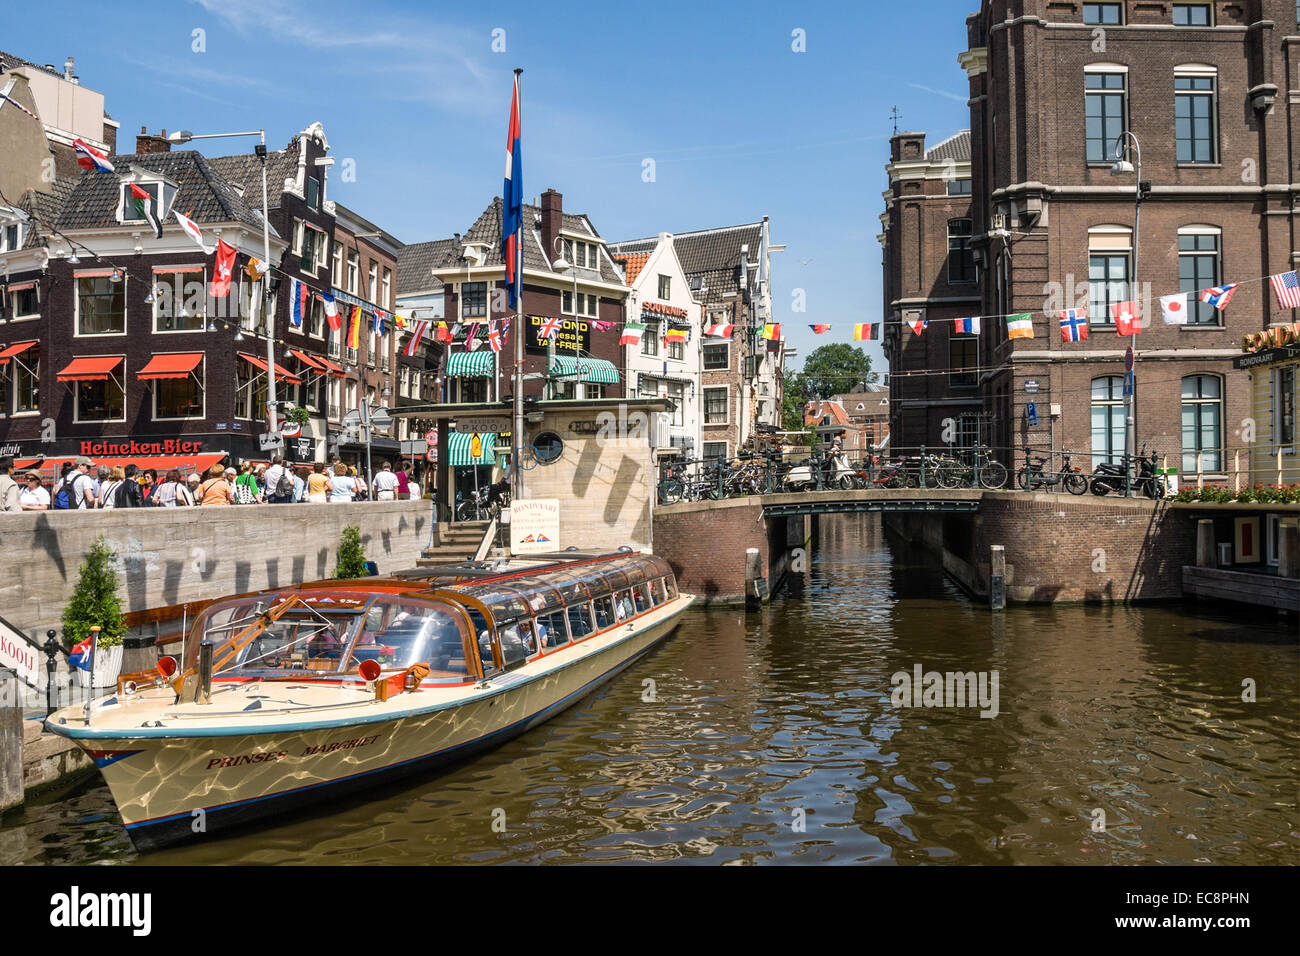 Typical sightseeing boats in a water channel in the city center of Amsterdam, Netherlands. Stock Photo